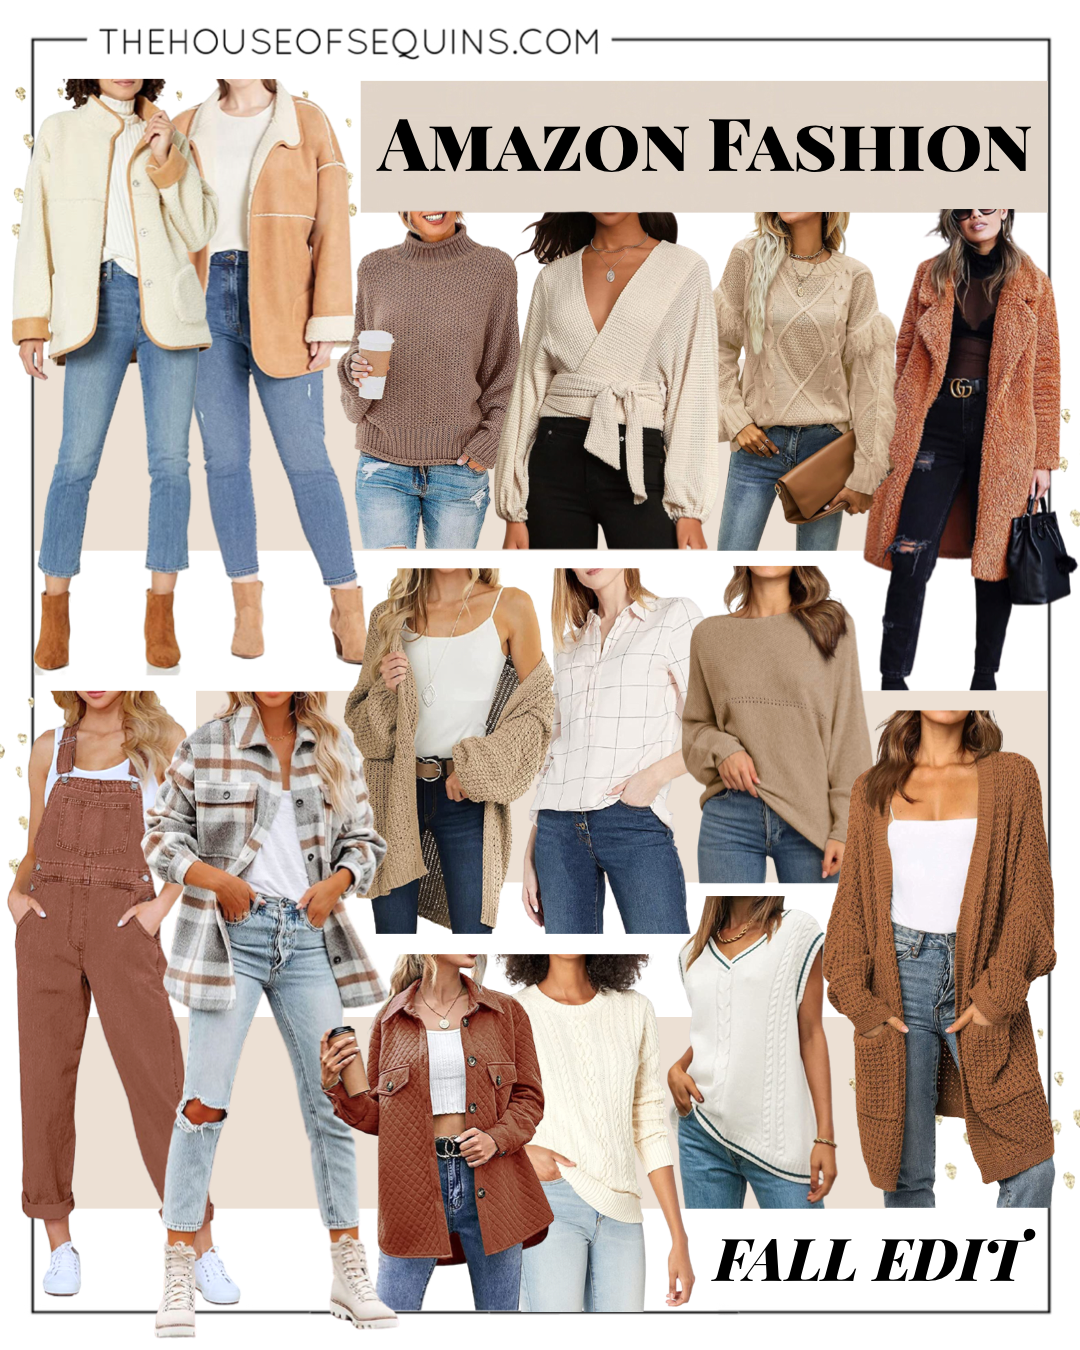 Blogger Sarah Lindner of The House of Sequins sharing Fall looks from Amazon Fashion.